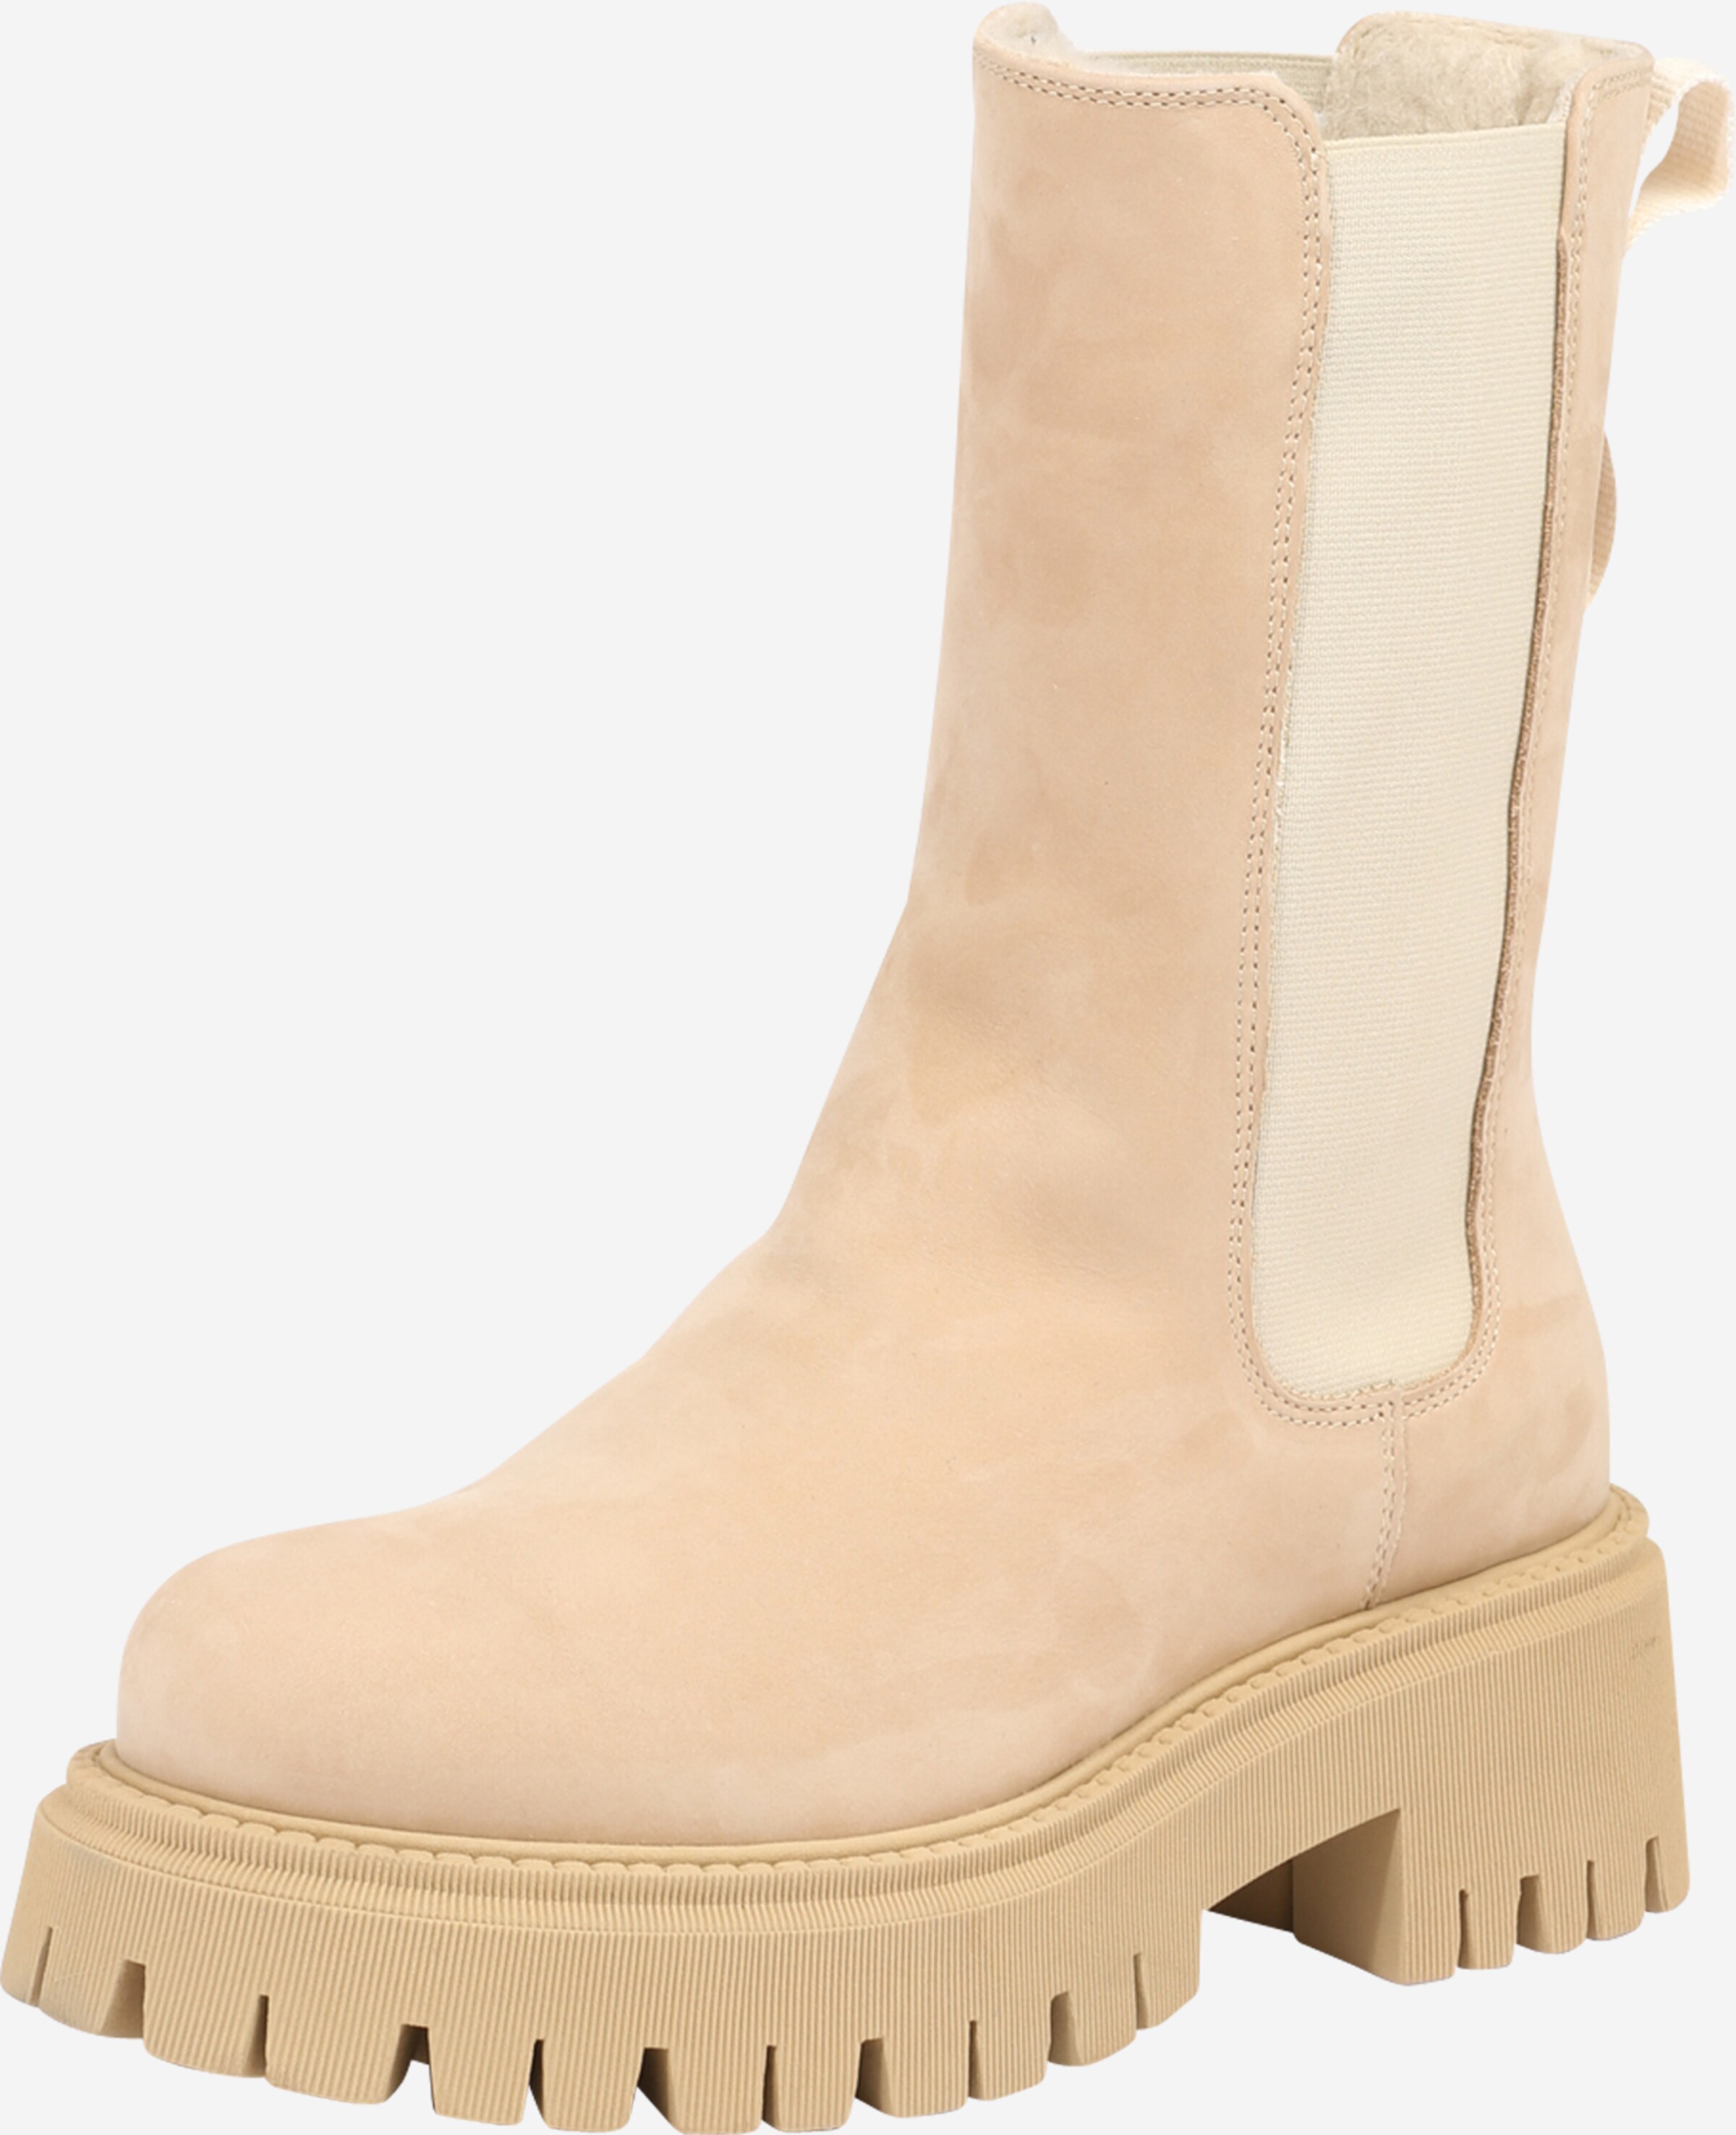 band theater Modernization Marc O'Polo Ankle boots in Sale for women | Buy online | ABOUT YOU